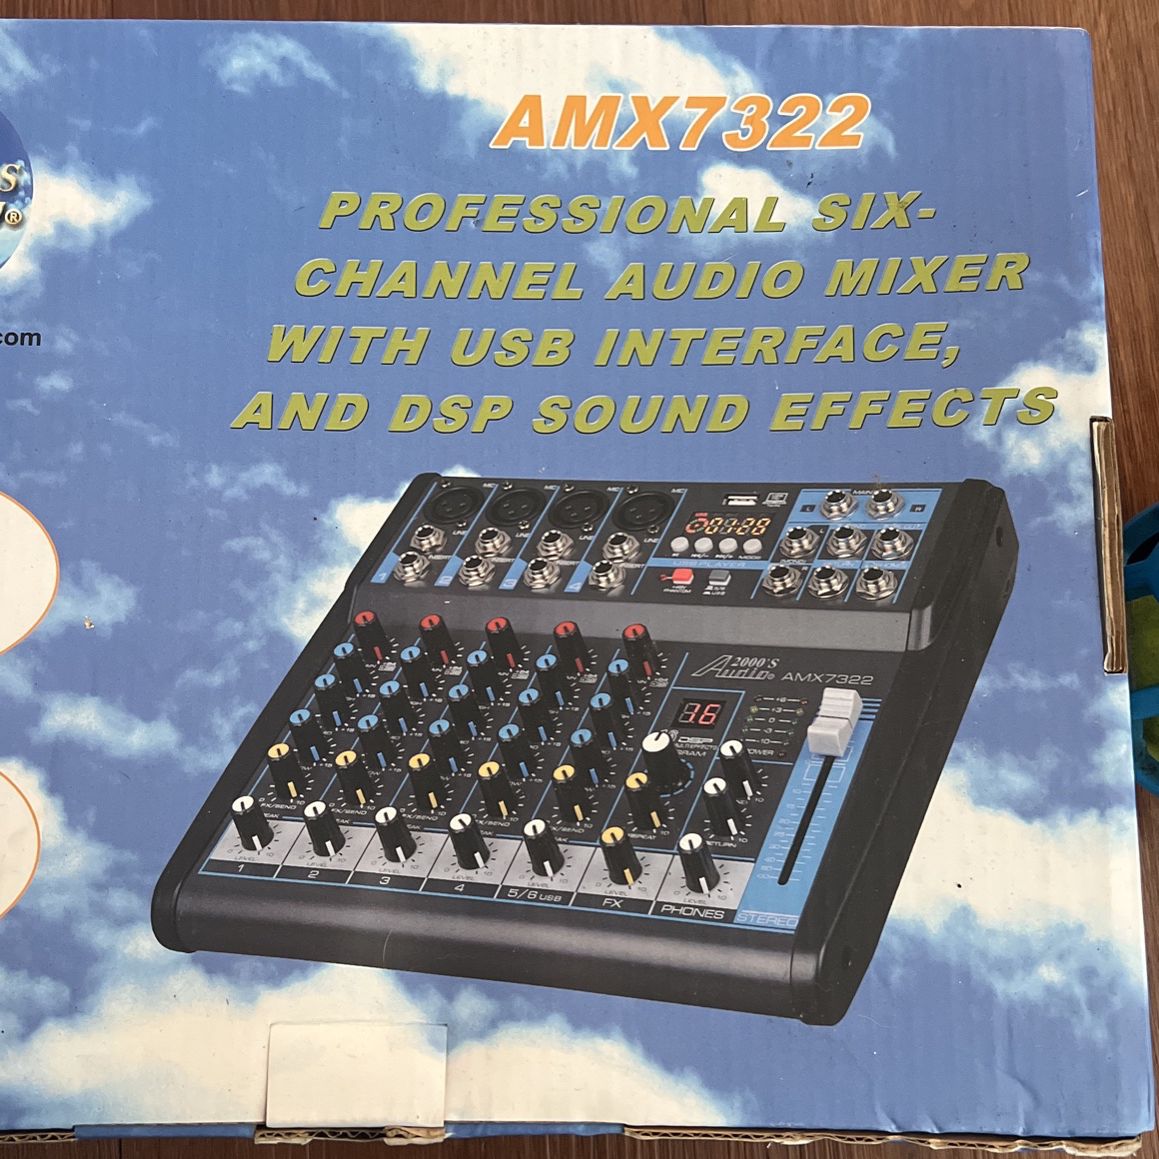 Six-Channel　Mixer　DSP　w/　Effects　USB　for　Professional　Fort　Sound　Sale　in　Audio　FL　OfferUp　Interface,　Lauderdale,